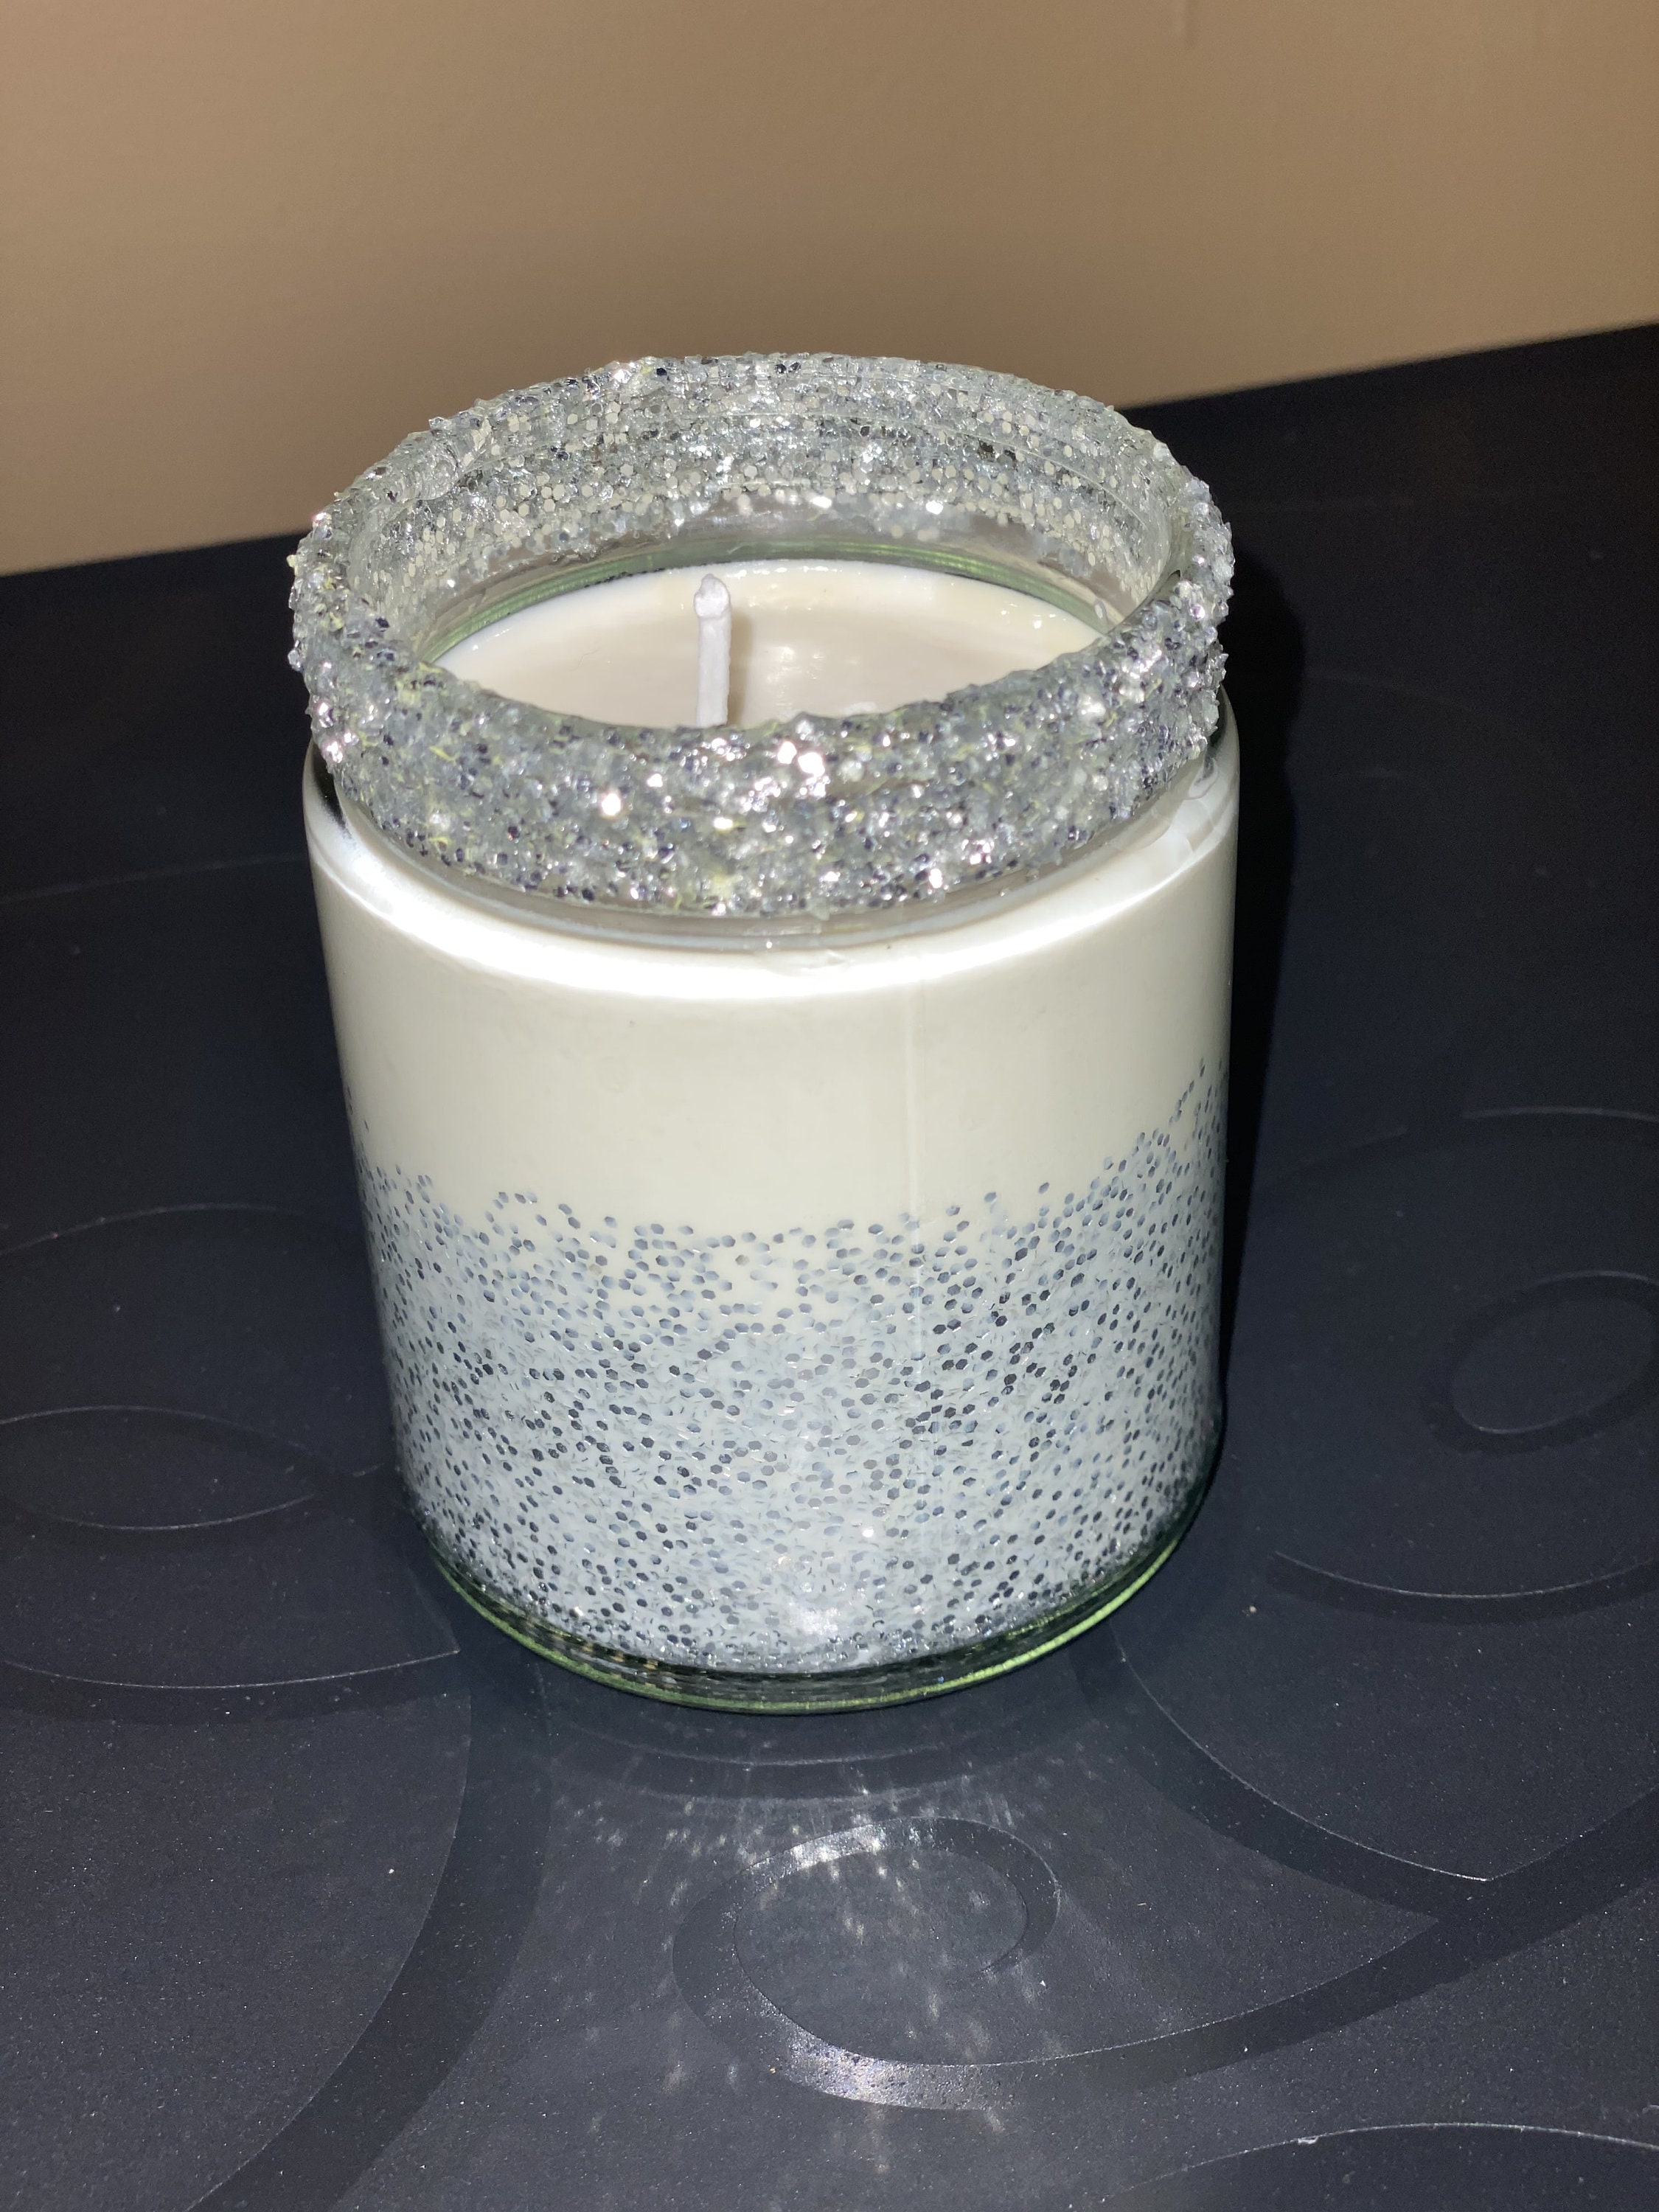  Scented Candle, 17 oz Glitter Jar Candle, Glam Home Decor